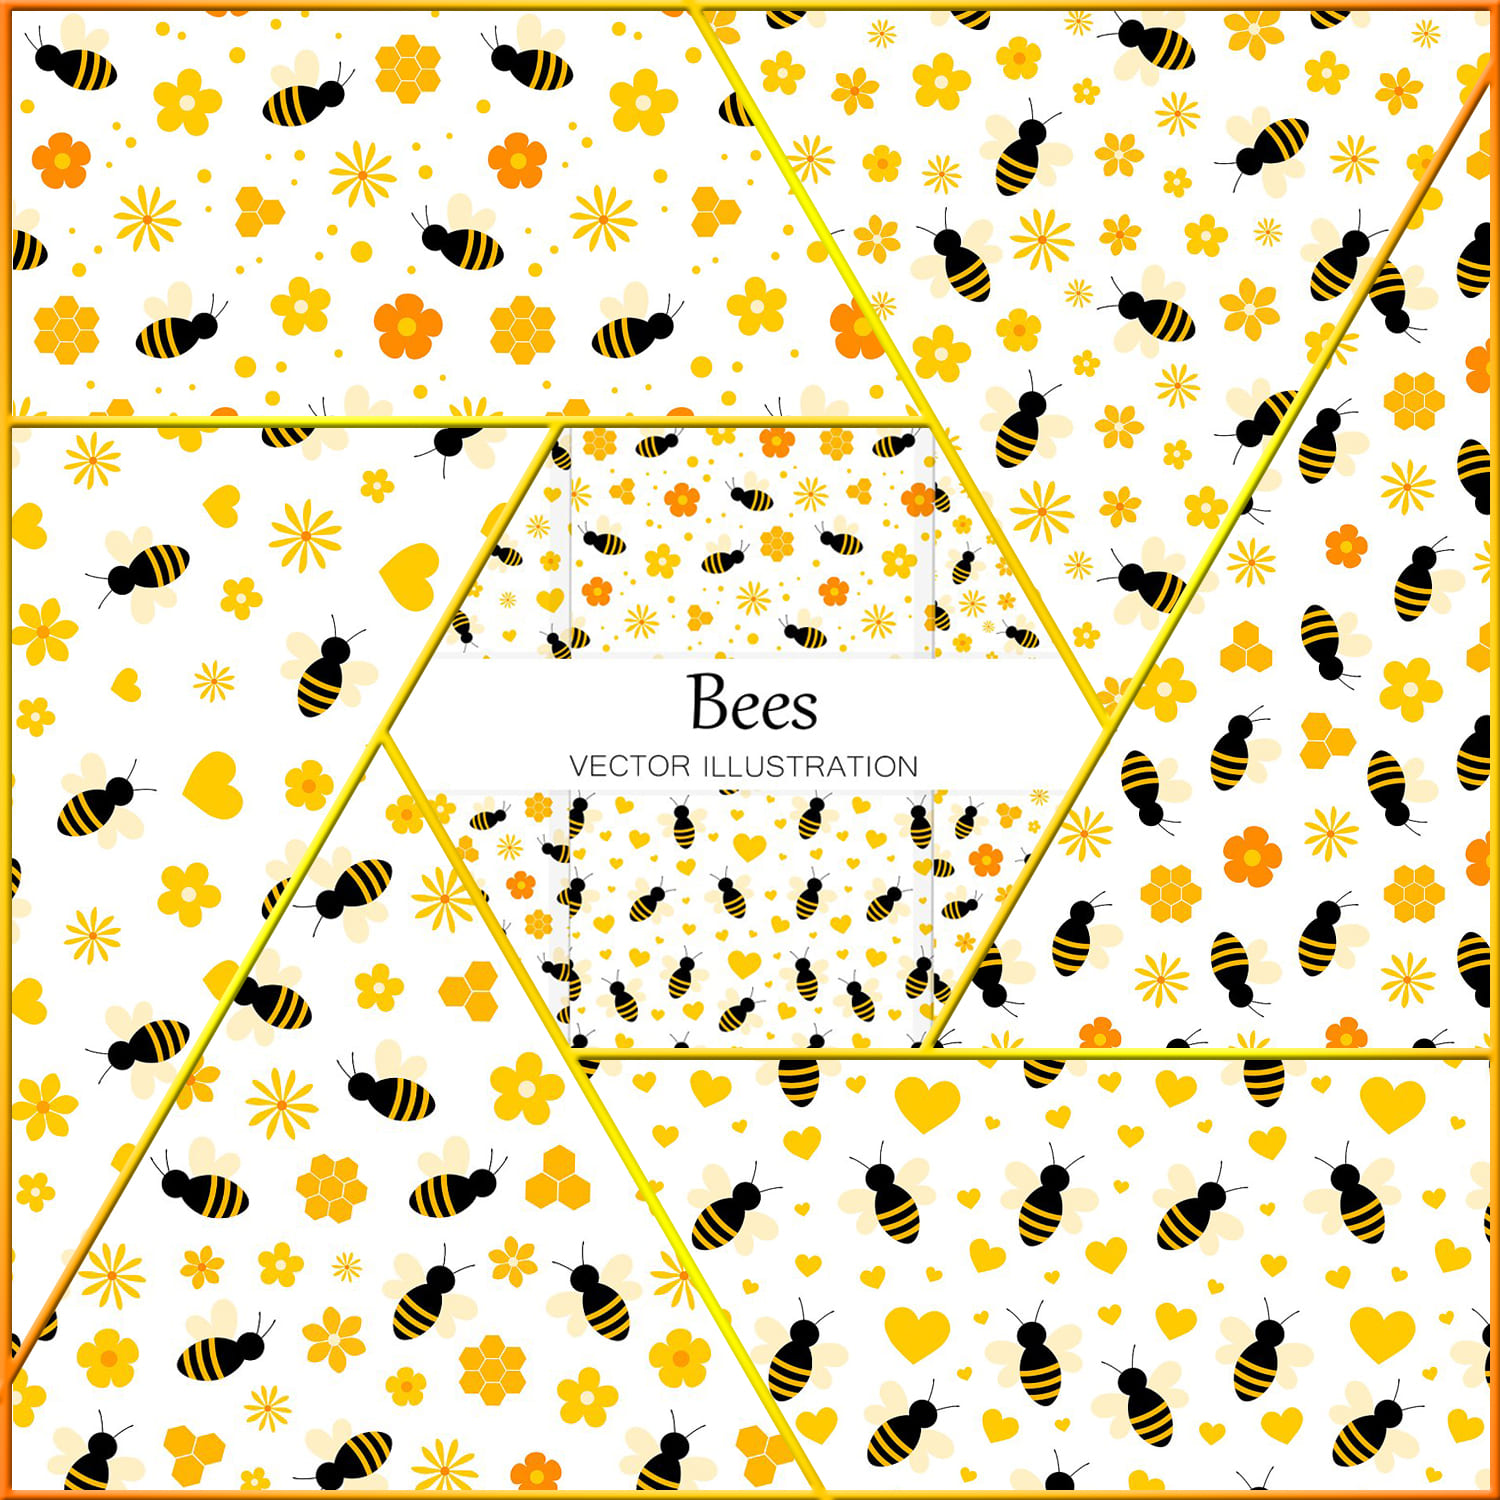 Bees pattern. Bees background cover.